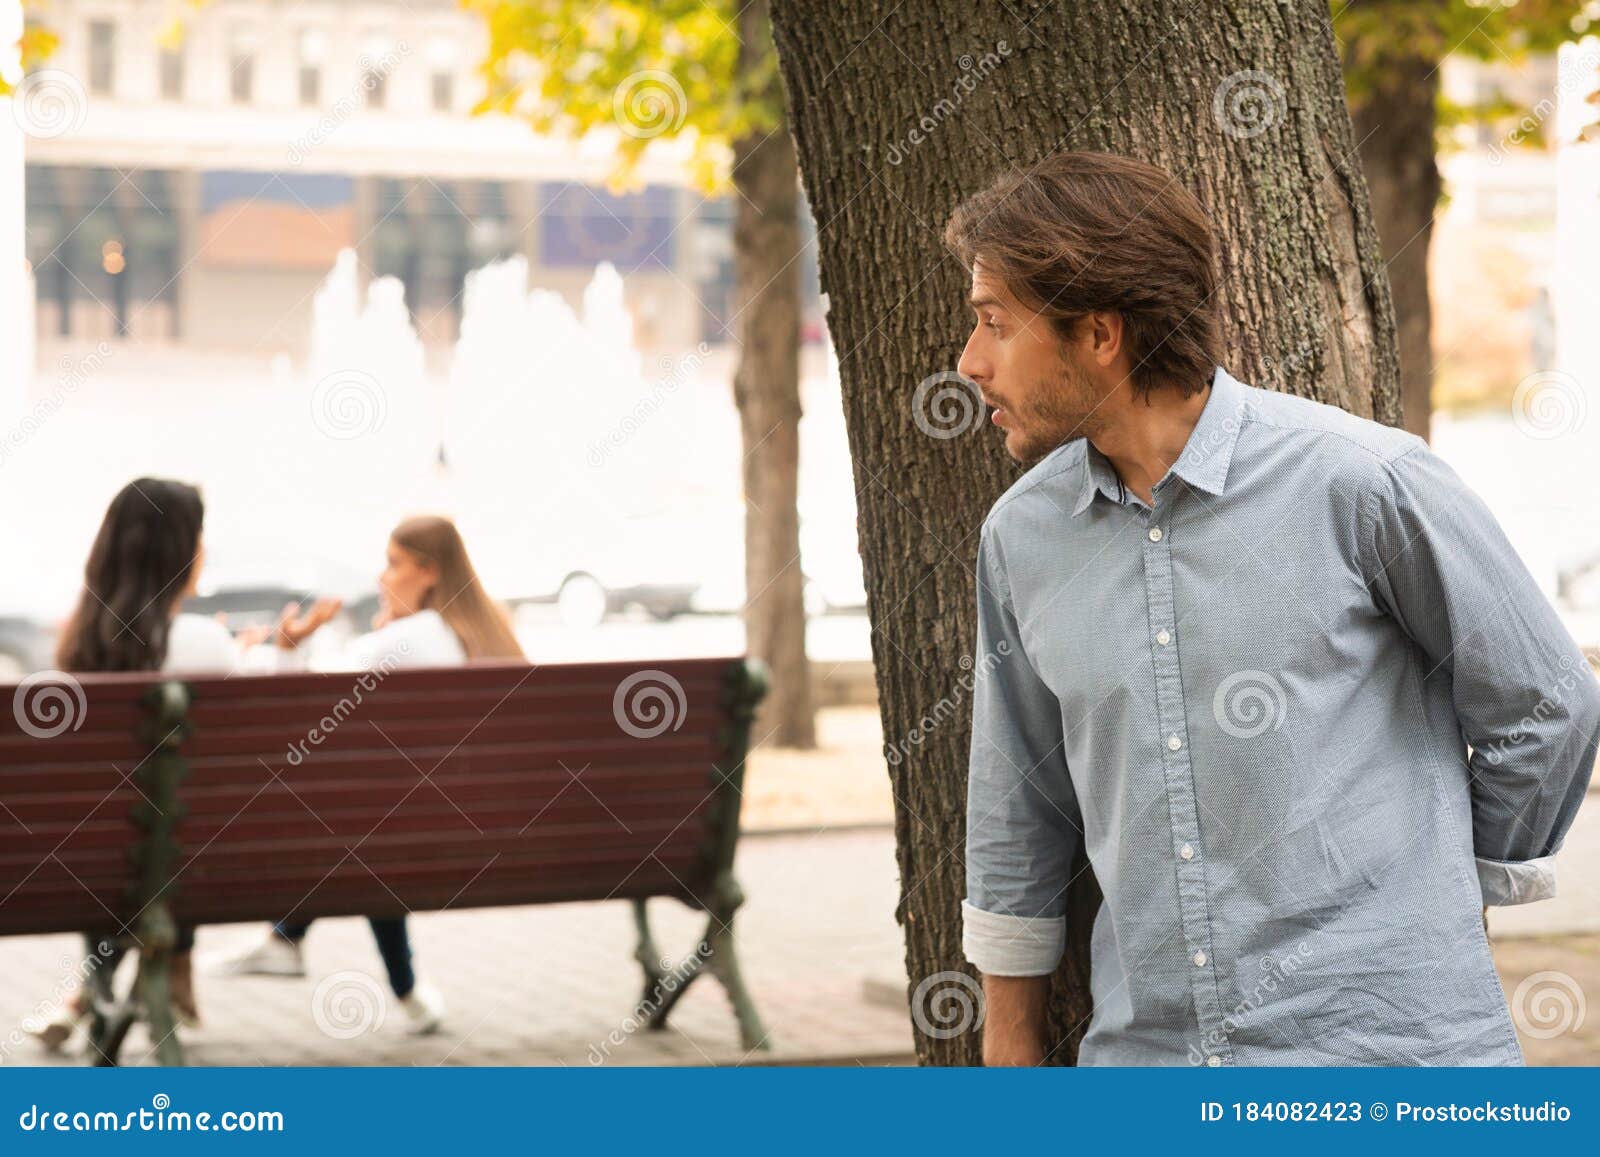 Man Spying On Girls While They Talking Sitting In Park Stock Image Image Of Girls Background